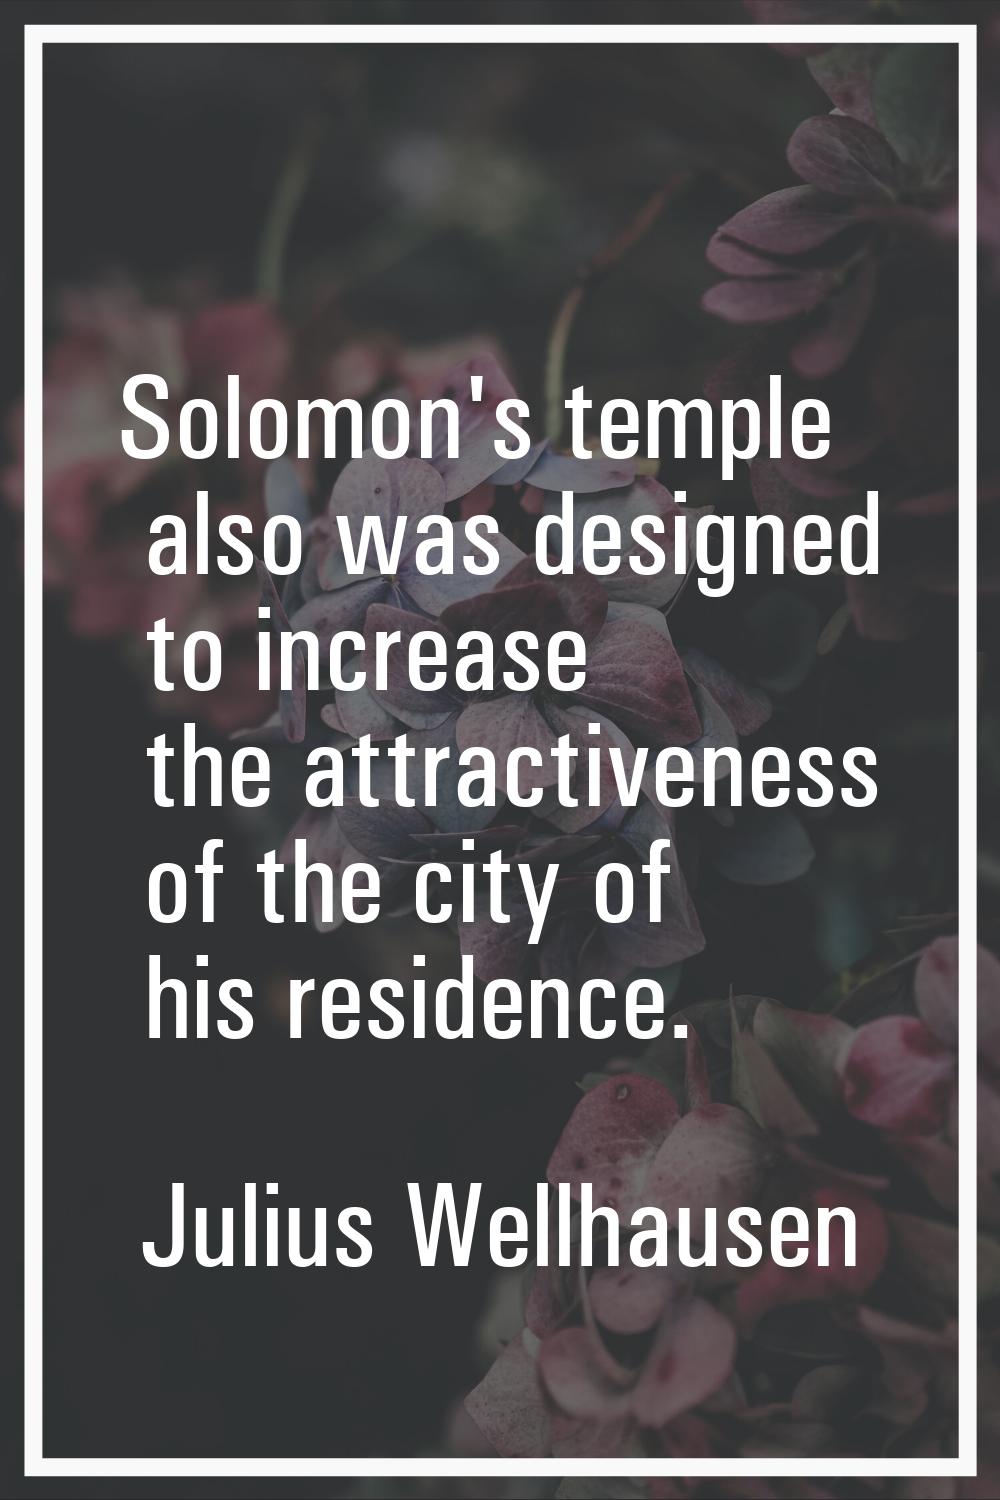 Solomon's temple also was designed to increase the attractiveness of the city of his residence.